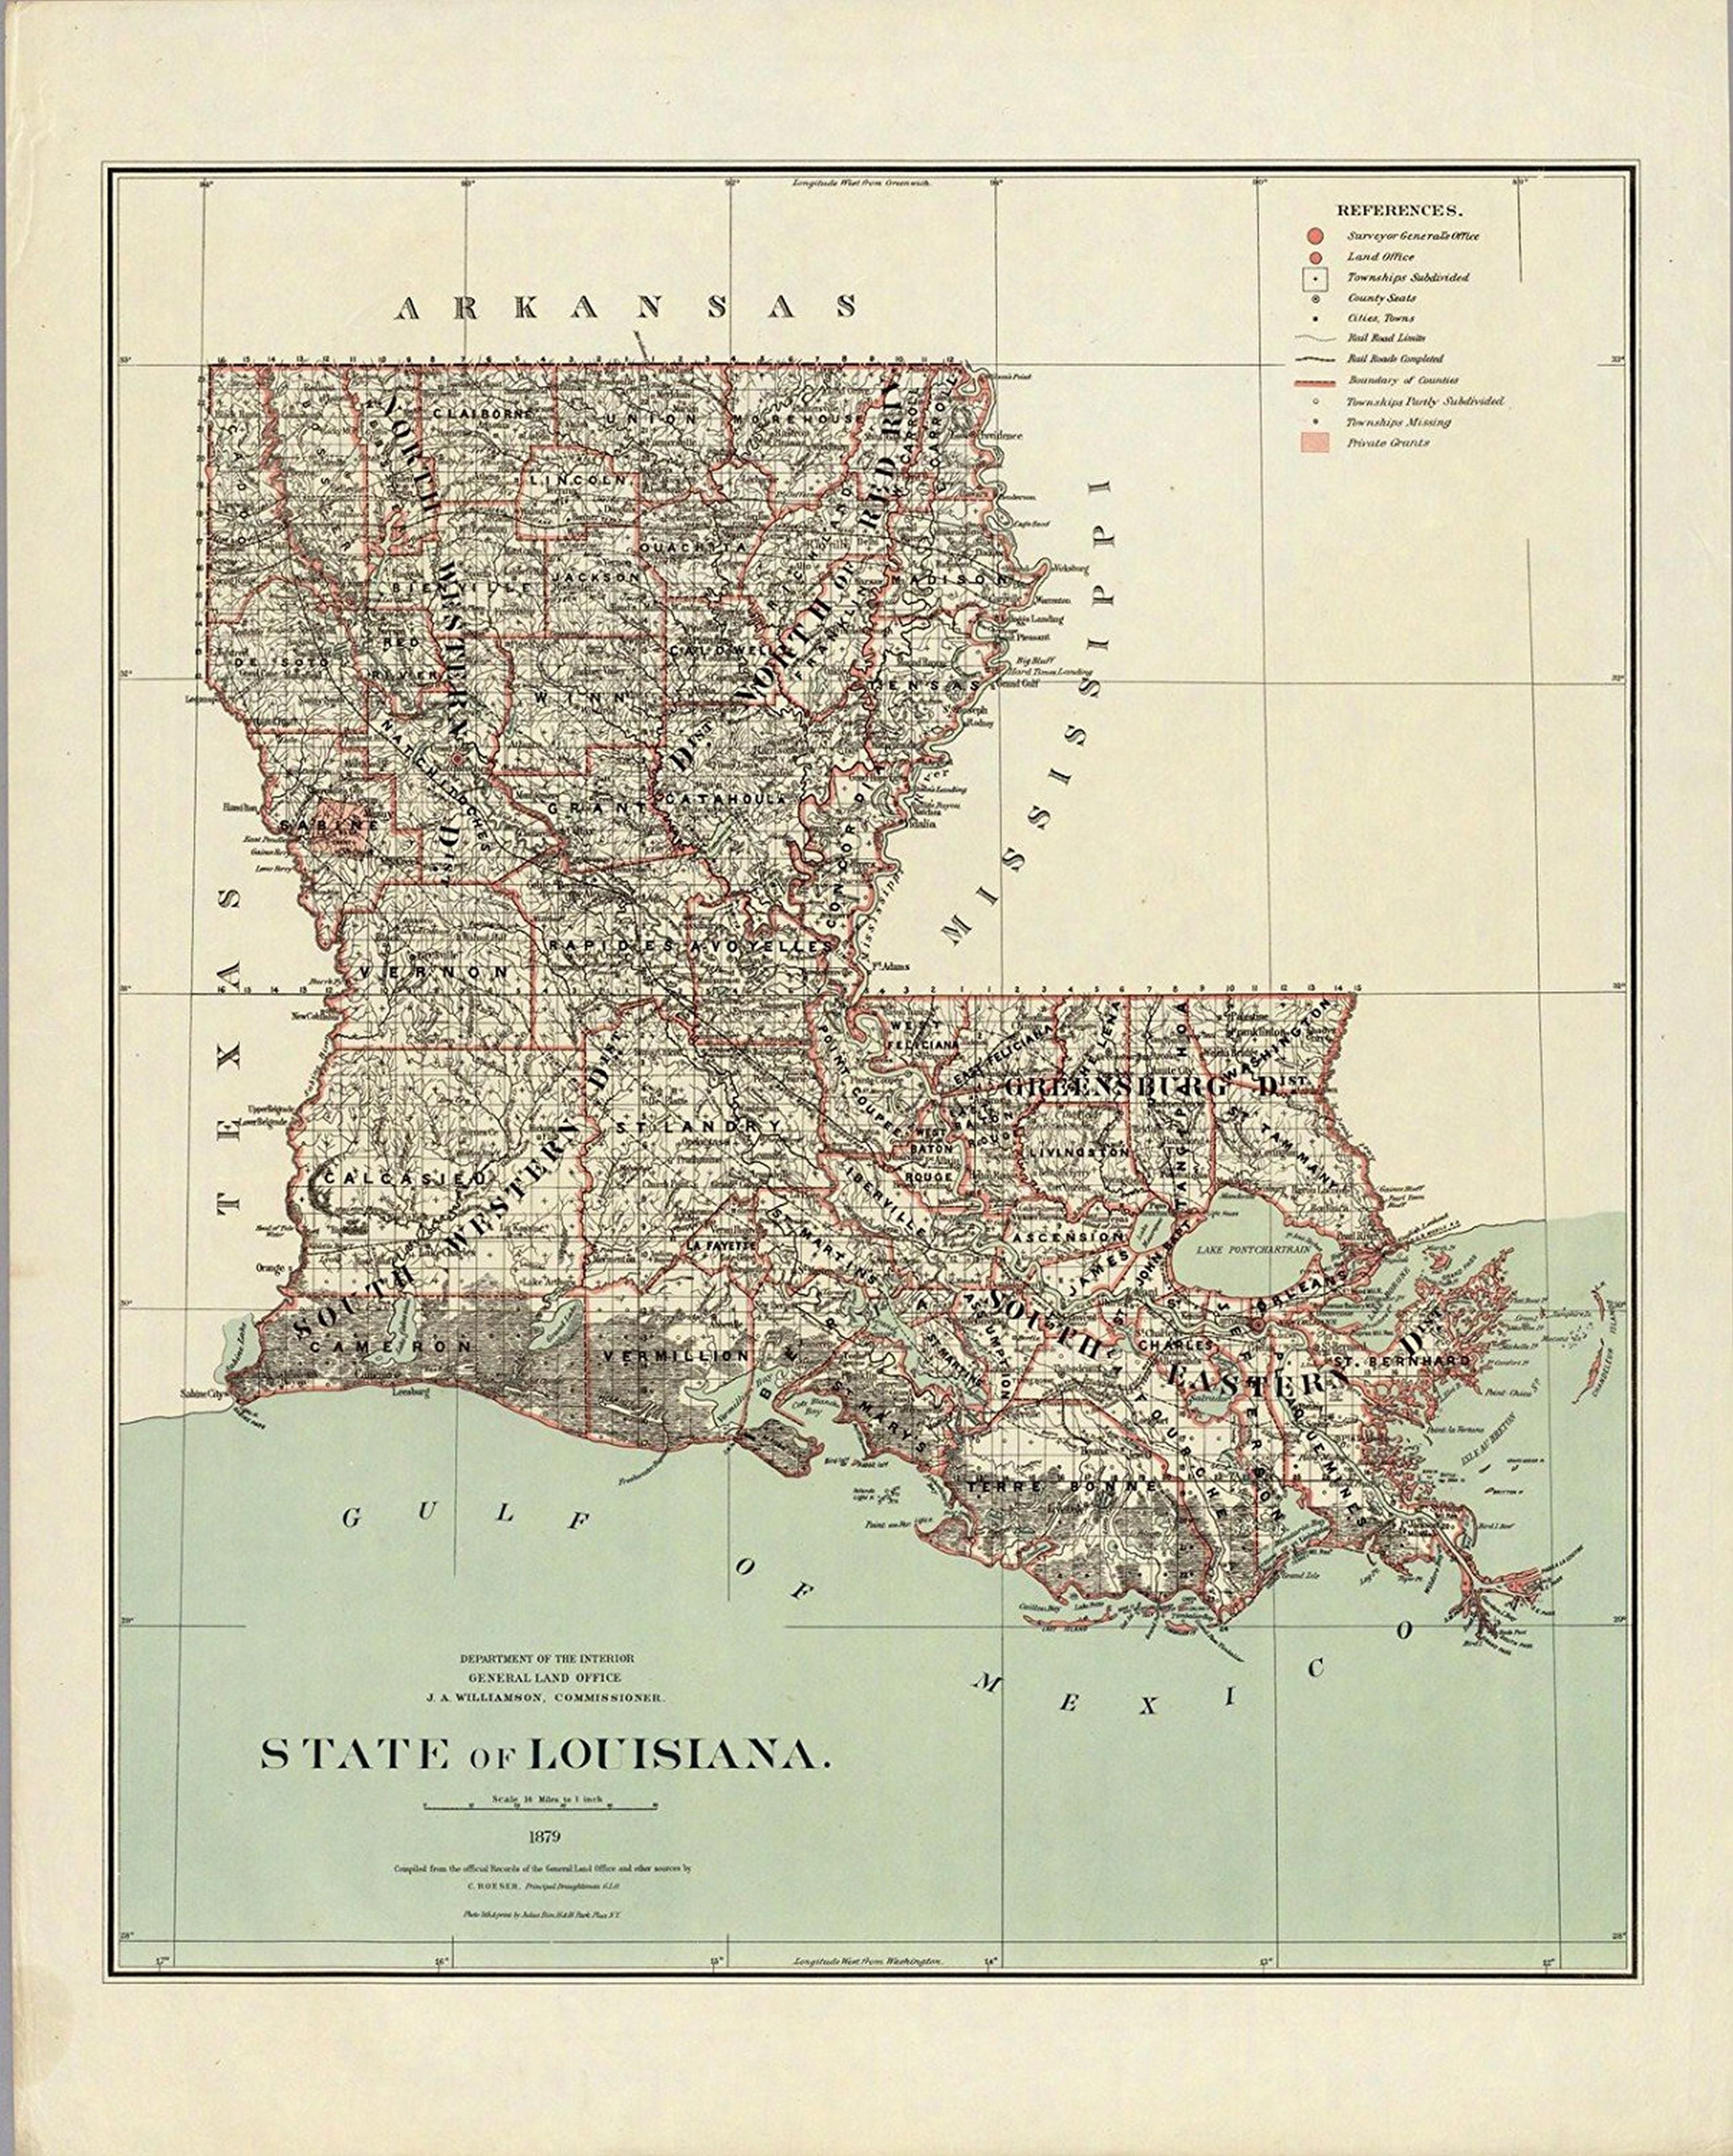 Department Of The Interior General Land Office J.A. Williamson, Commissioner. State of Louisiana. 1879. Compiled from the official Records of the General Land Office and other sources by C. Roeser, Principal Draughtsman G.L.O. Photo lith and print by Jul